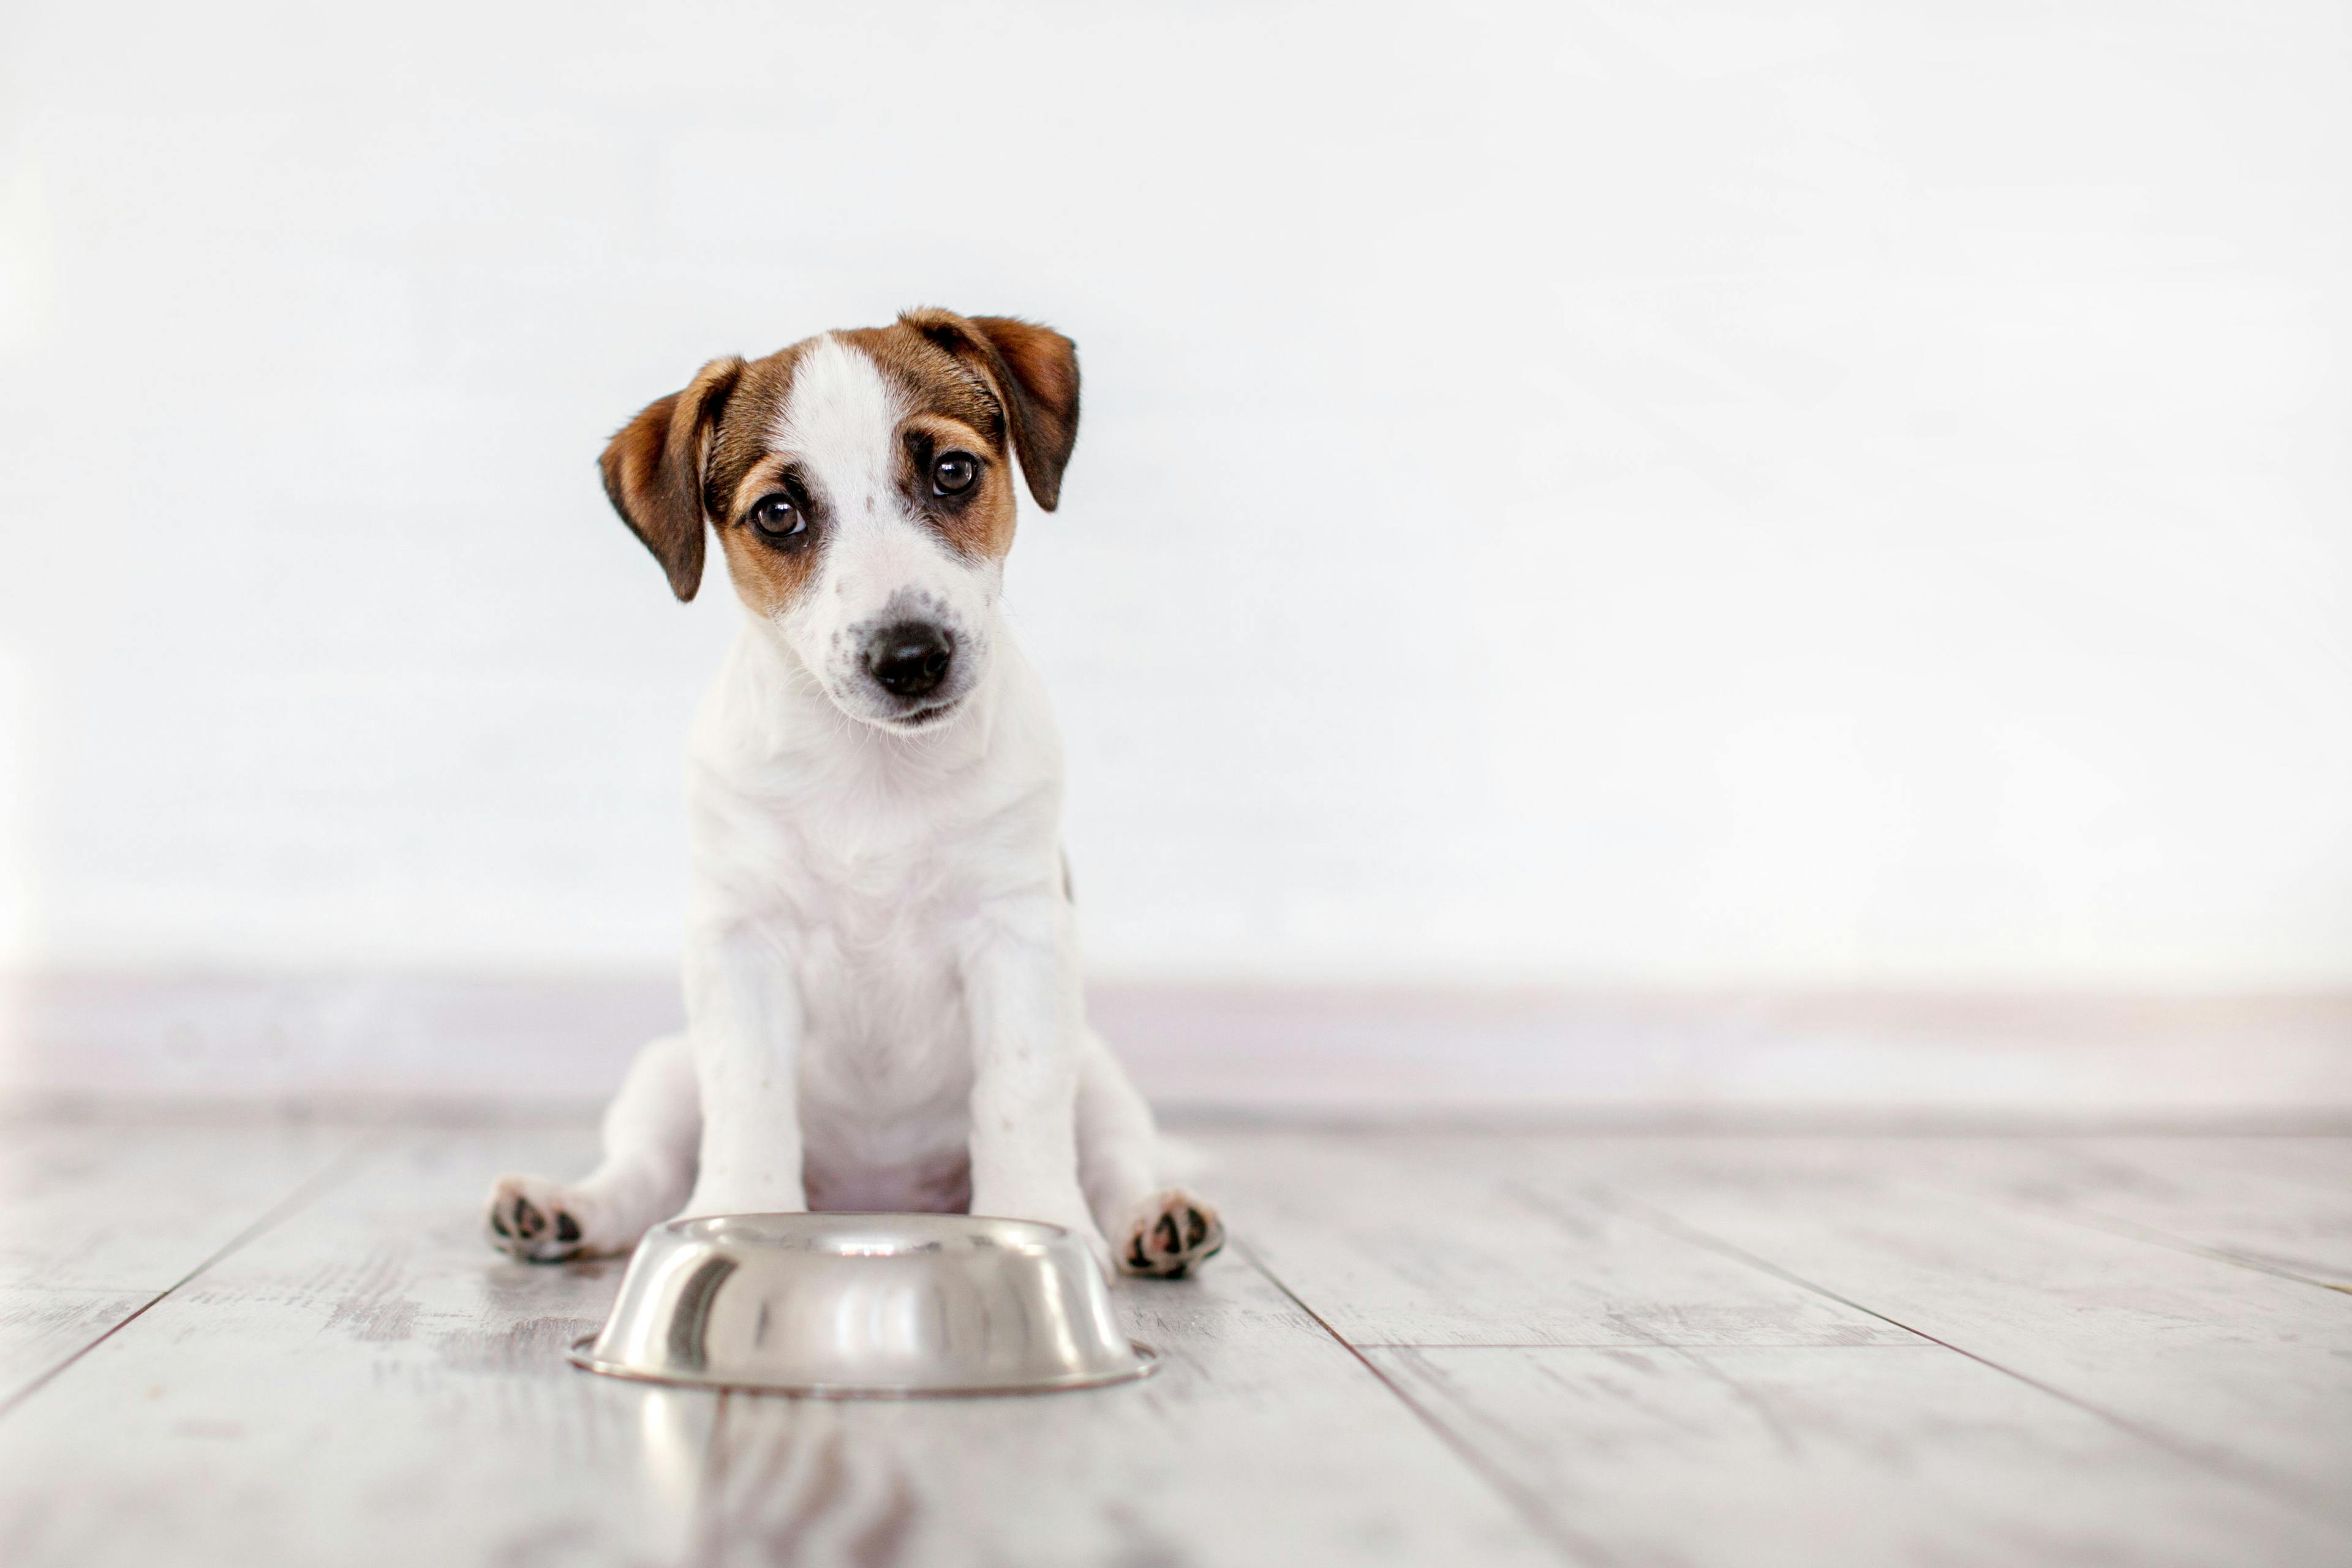 Patent-pending ingredient to serve as alternative protein source for pet food